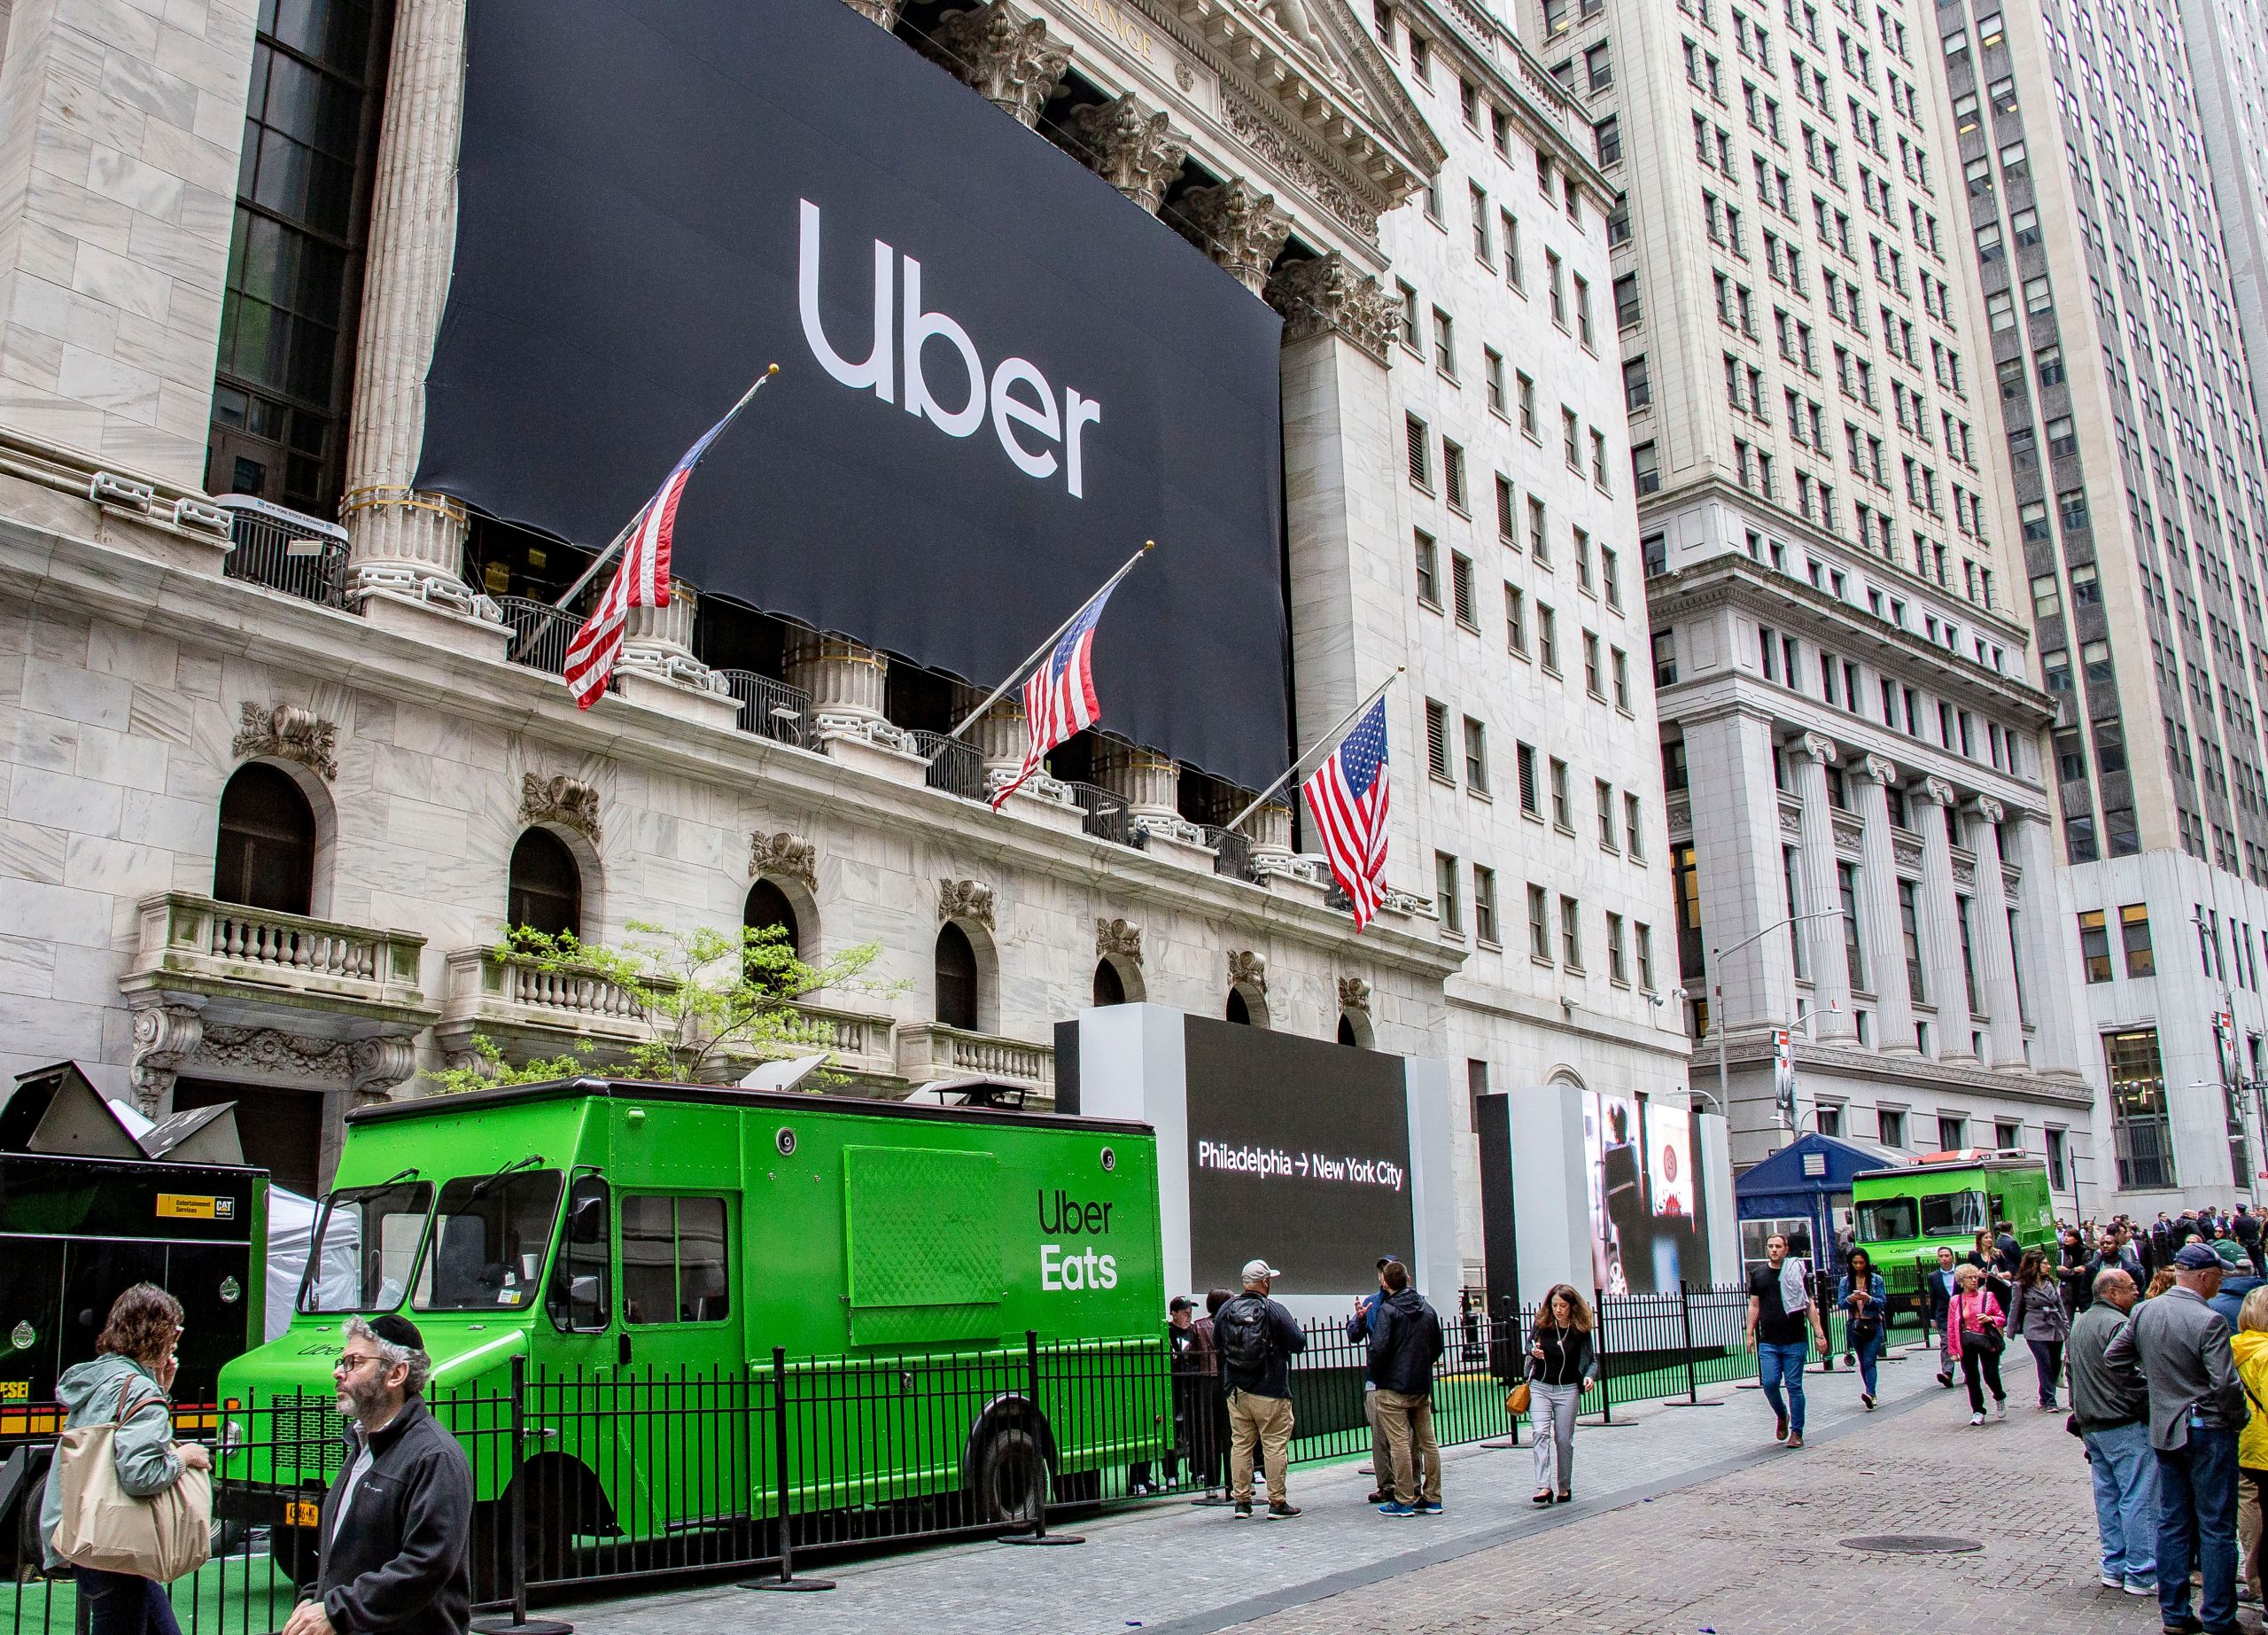 Uber IPO on Wall Street experiential marketing.